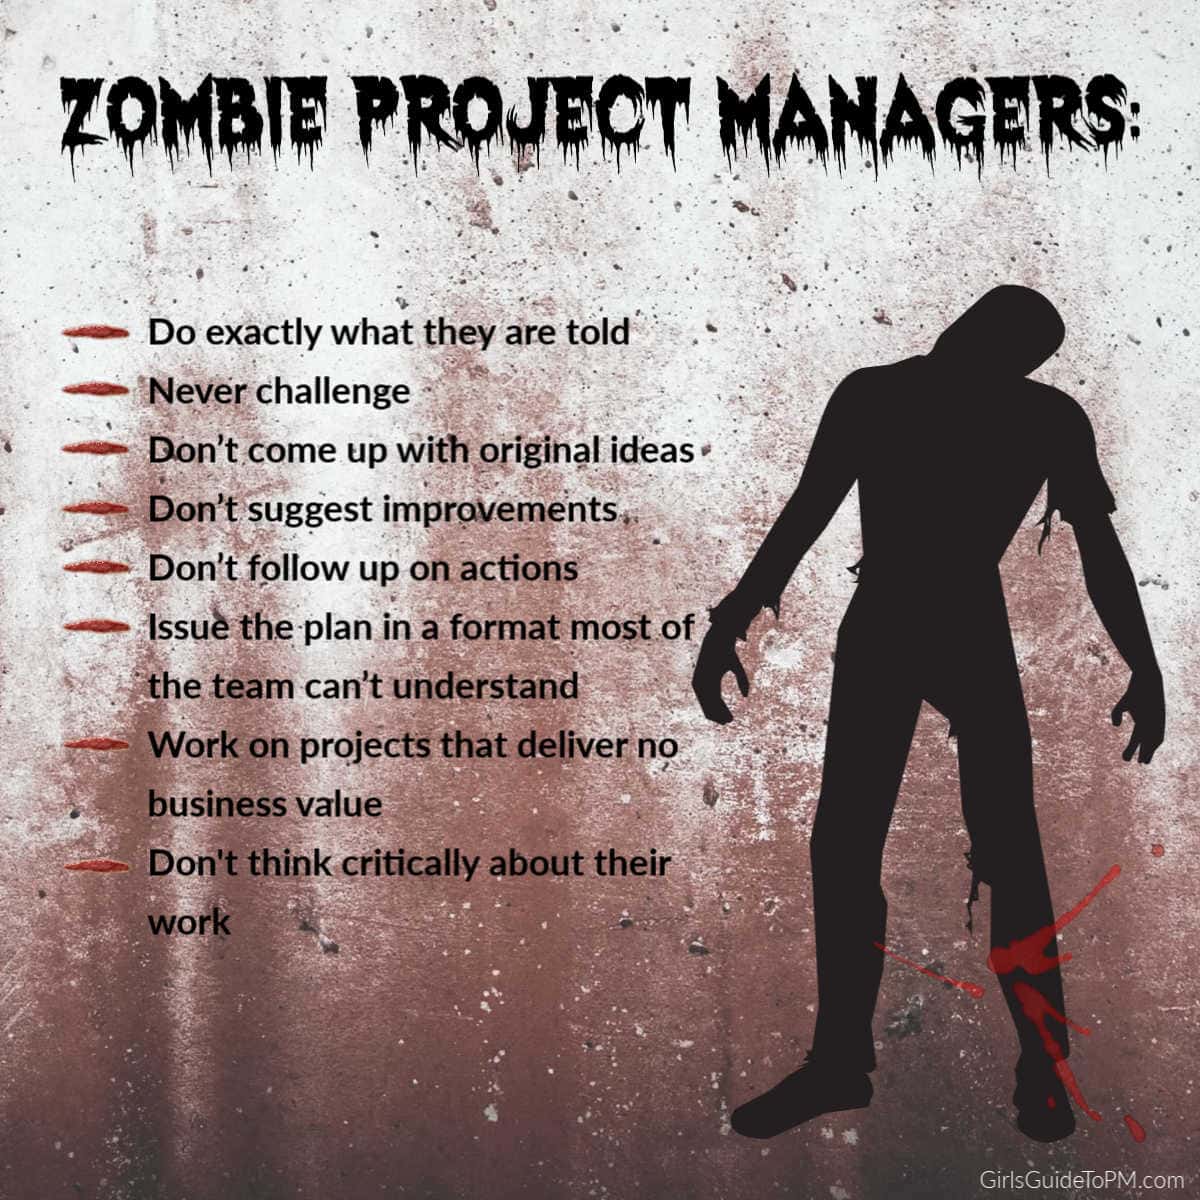 traits of zombie project managers